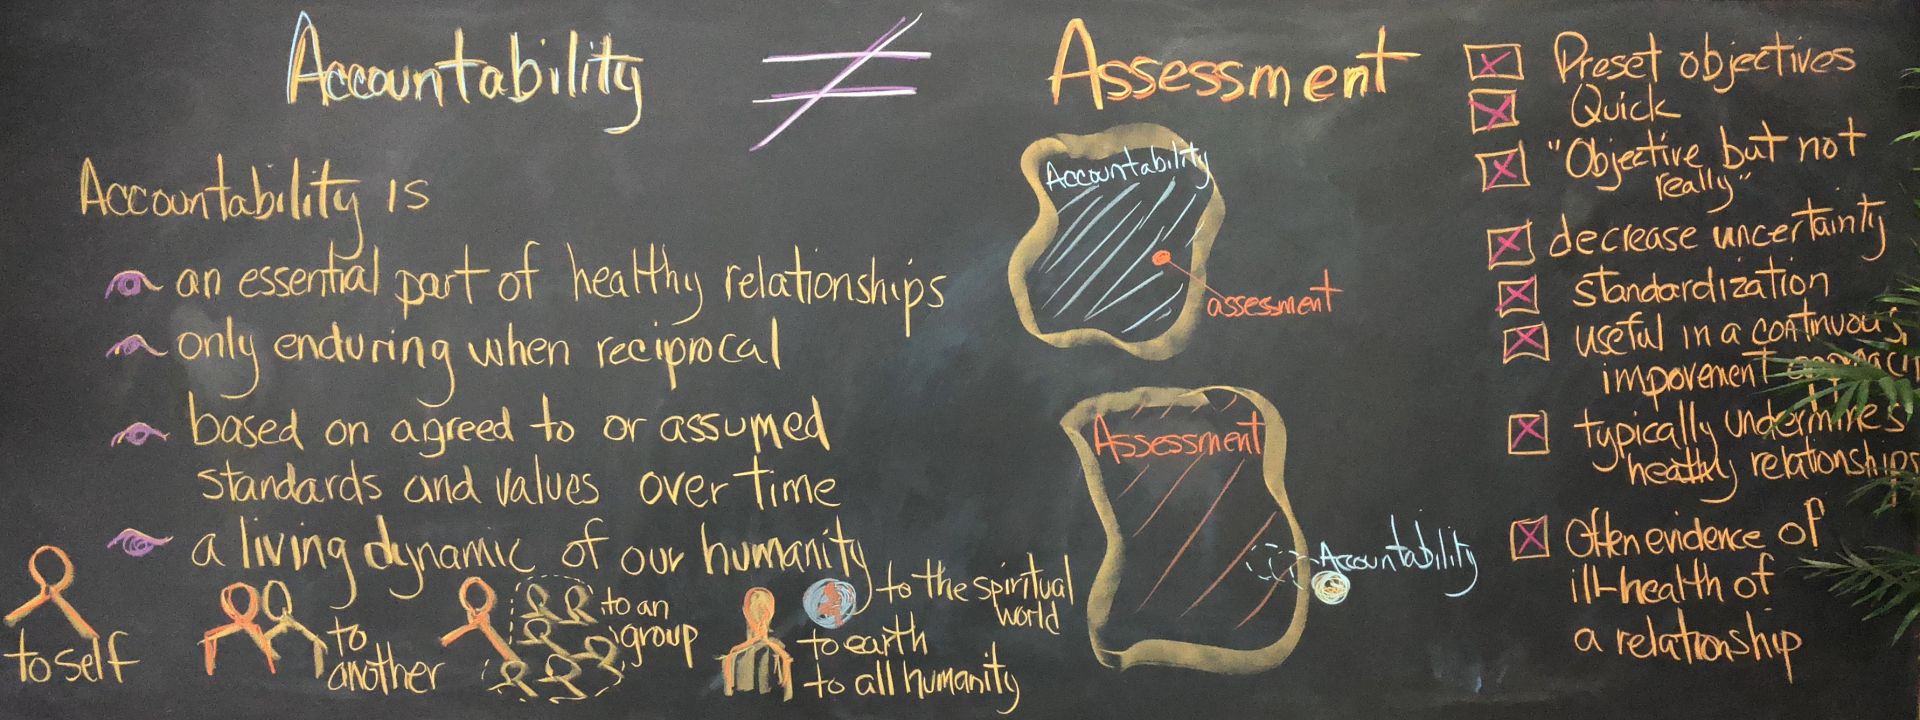 Chalkboard with orange and yellow writing about accountability and assessment, with images drown around the writing.